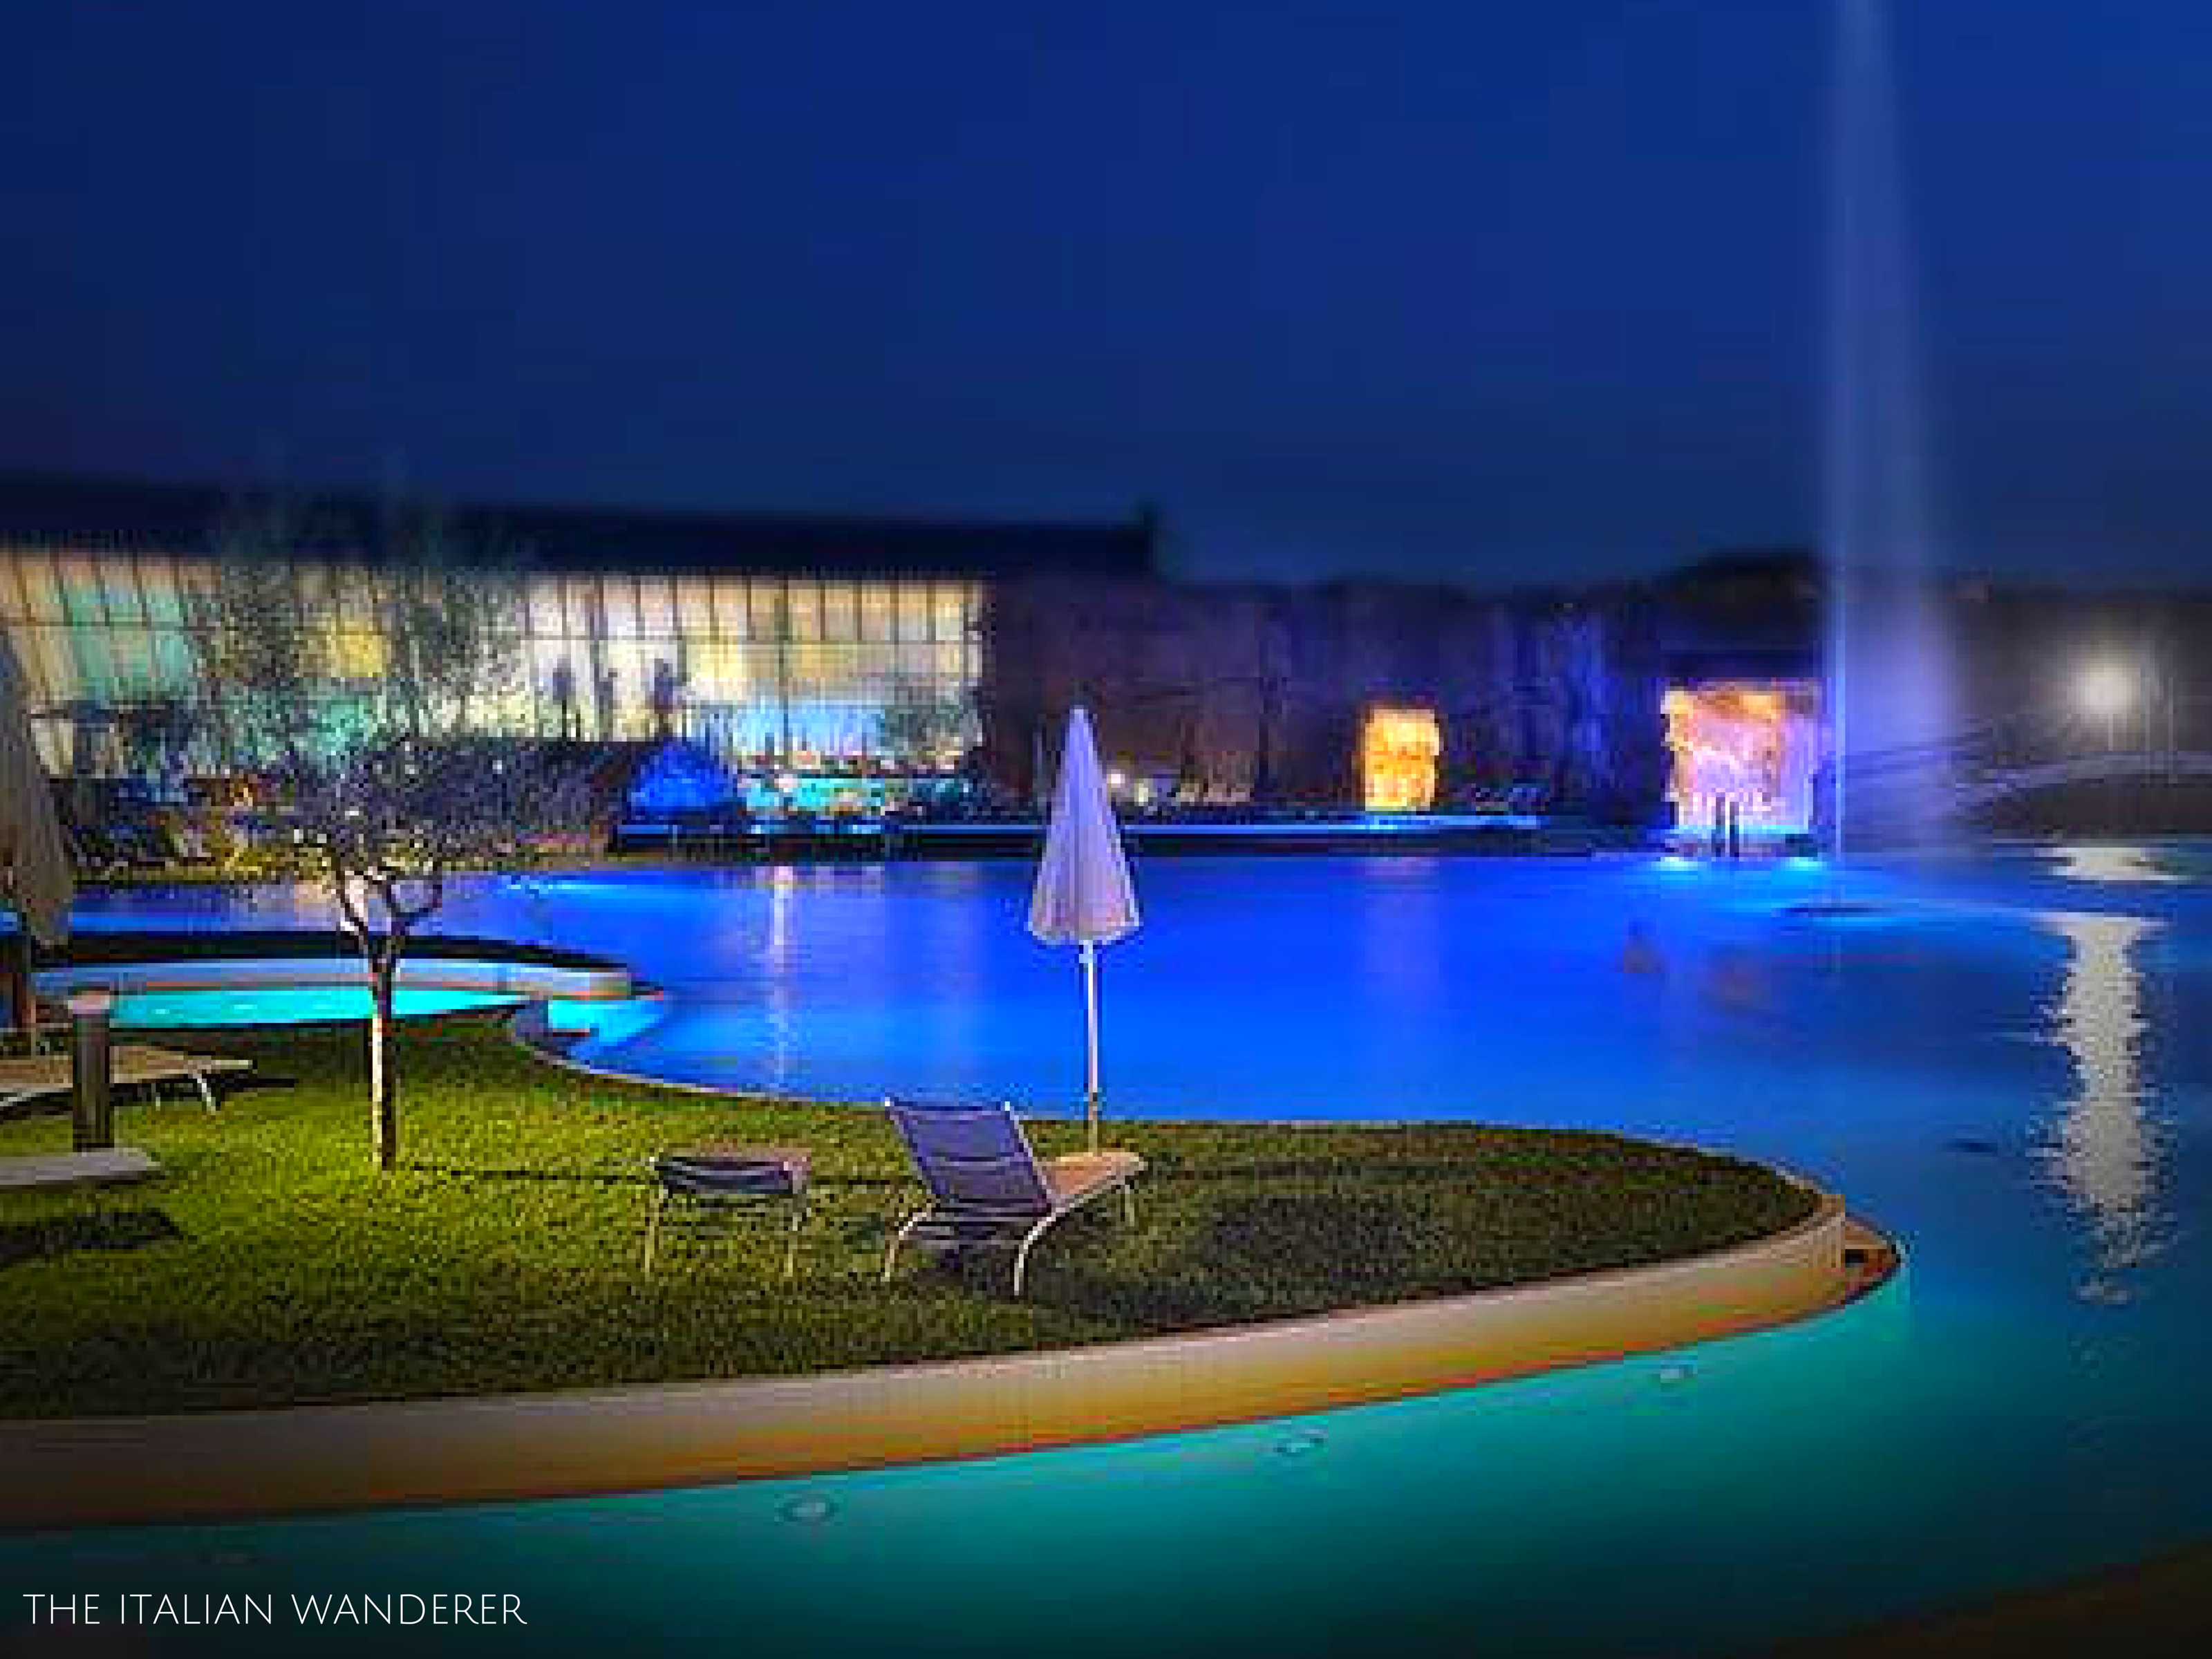 Aquardens, the thermal park of Verona located in Pescantina, few minutes from the city